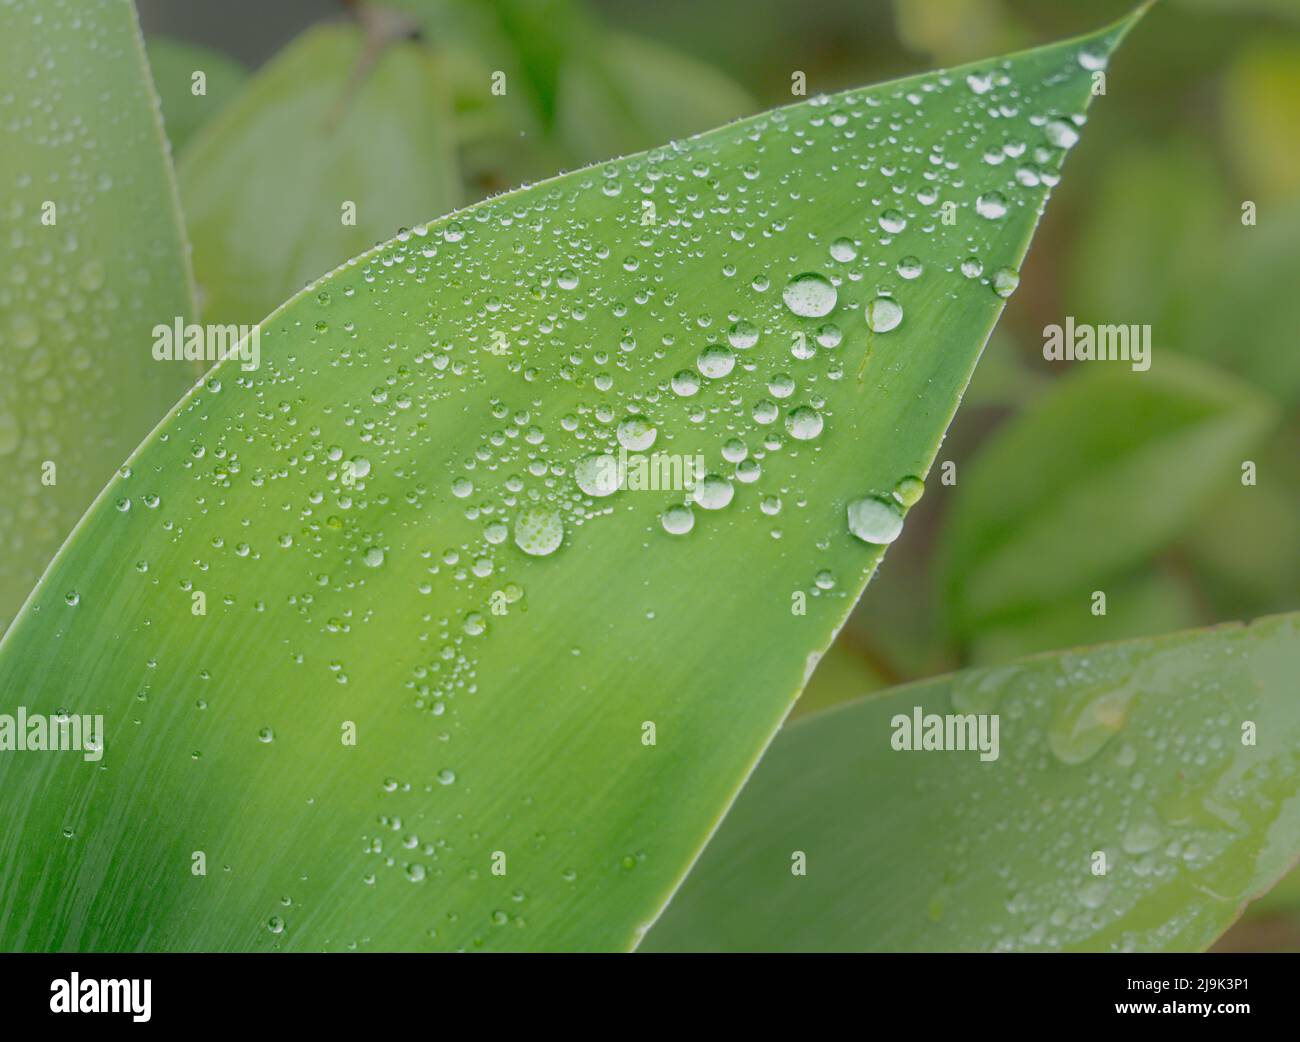 Close up of beads of rainwater on a green foxtail agave (Agave attenuata) leaf Stock Photo